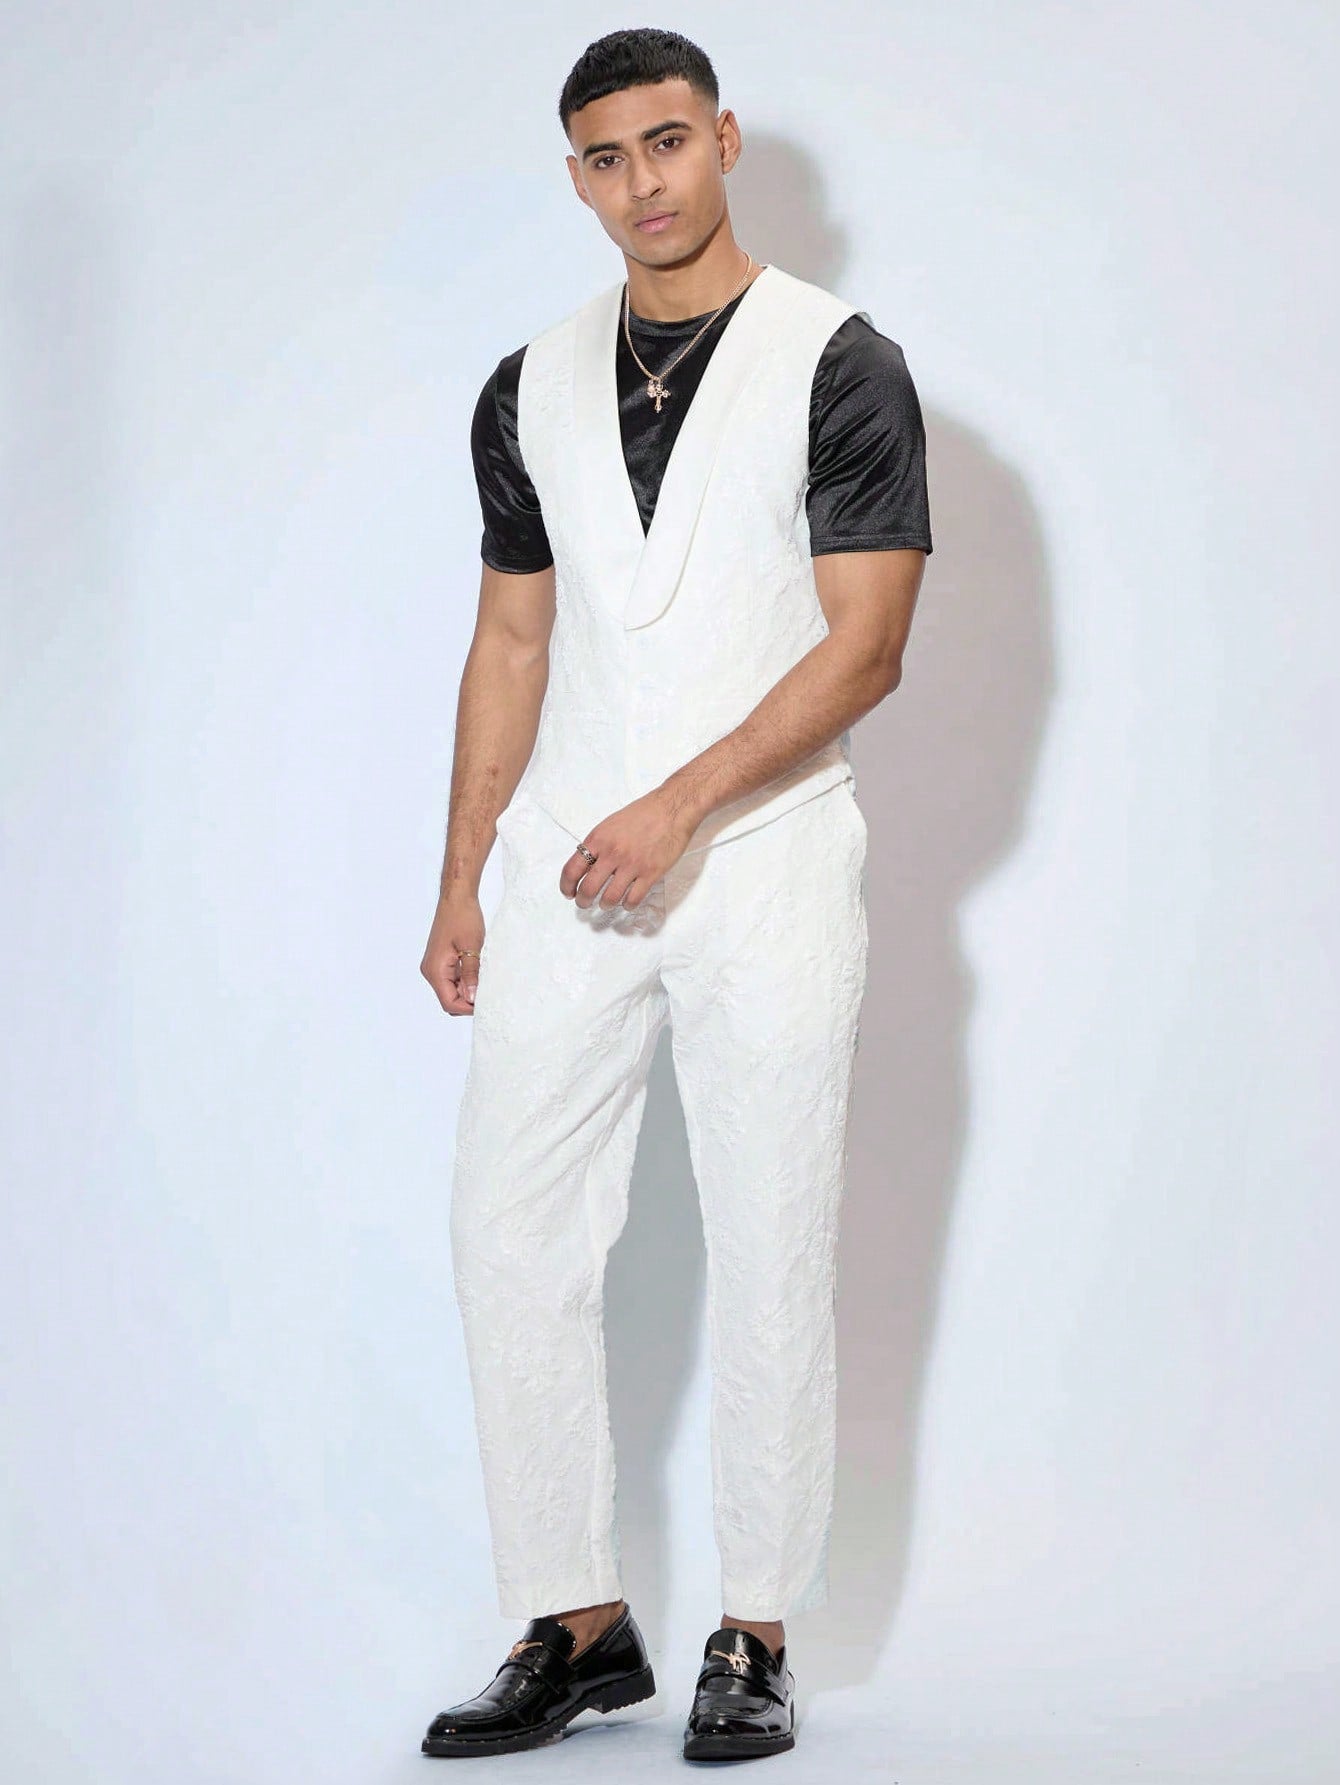 Men's Jacquard White Suit Vest, Jacket And Pants, Perfect For Wedding Season, Music Festivals And Spring/Summer Holidays